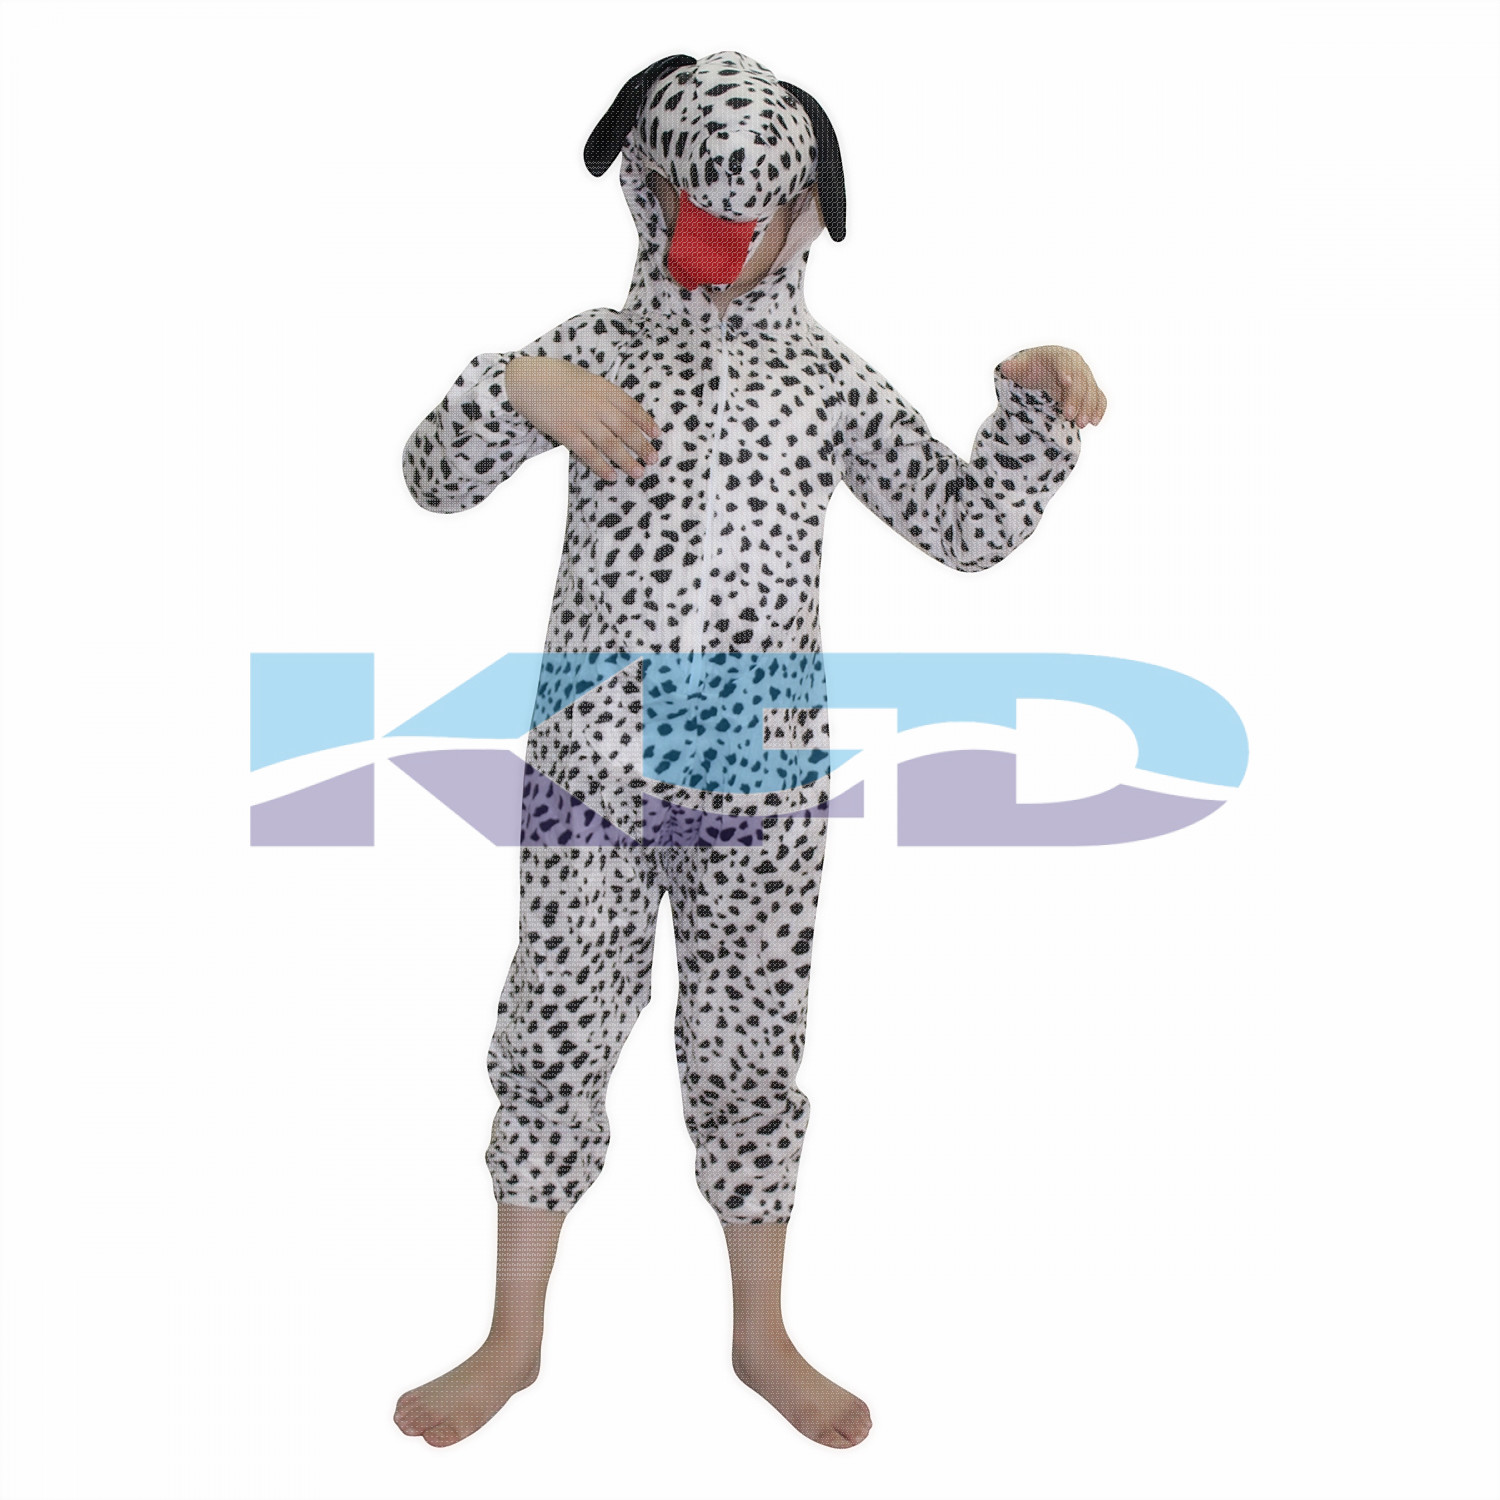 Dog fancy dress for kids,Pet Animal Costume for School Annual  function/Theme Party/Competition/Stage Shows Dress